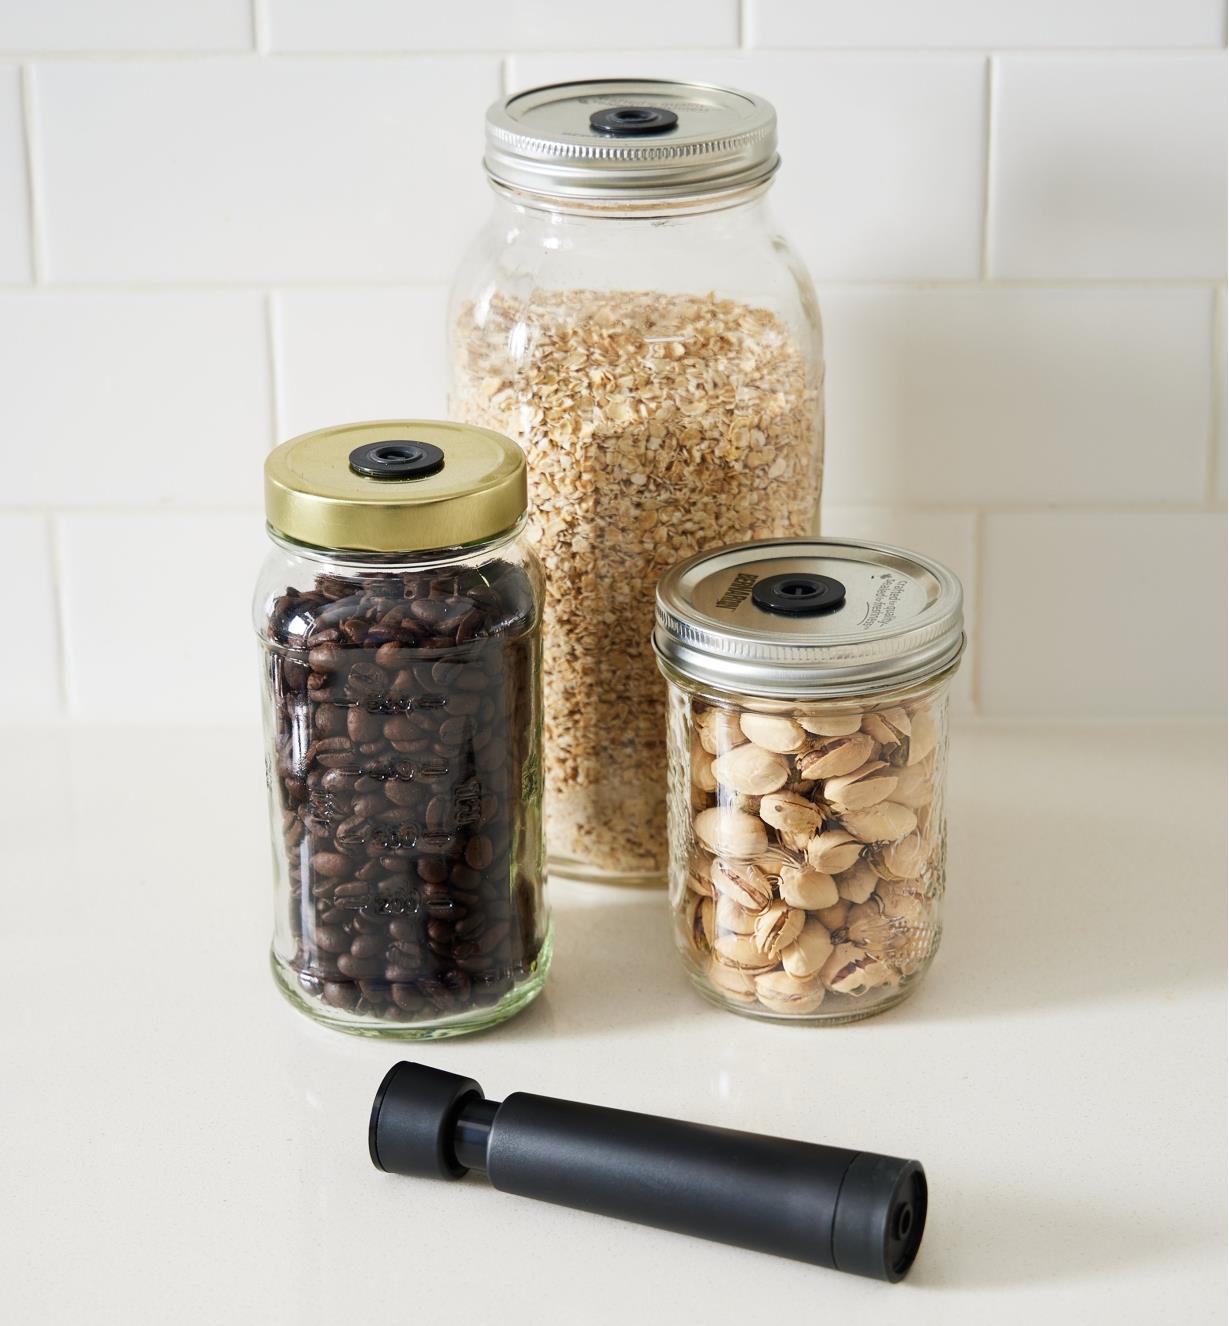 Coffee beans, oats and pistachio nuts stored in jars using the Airtender system